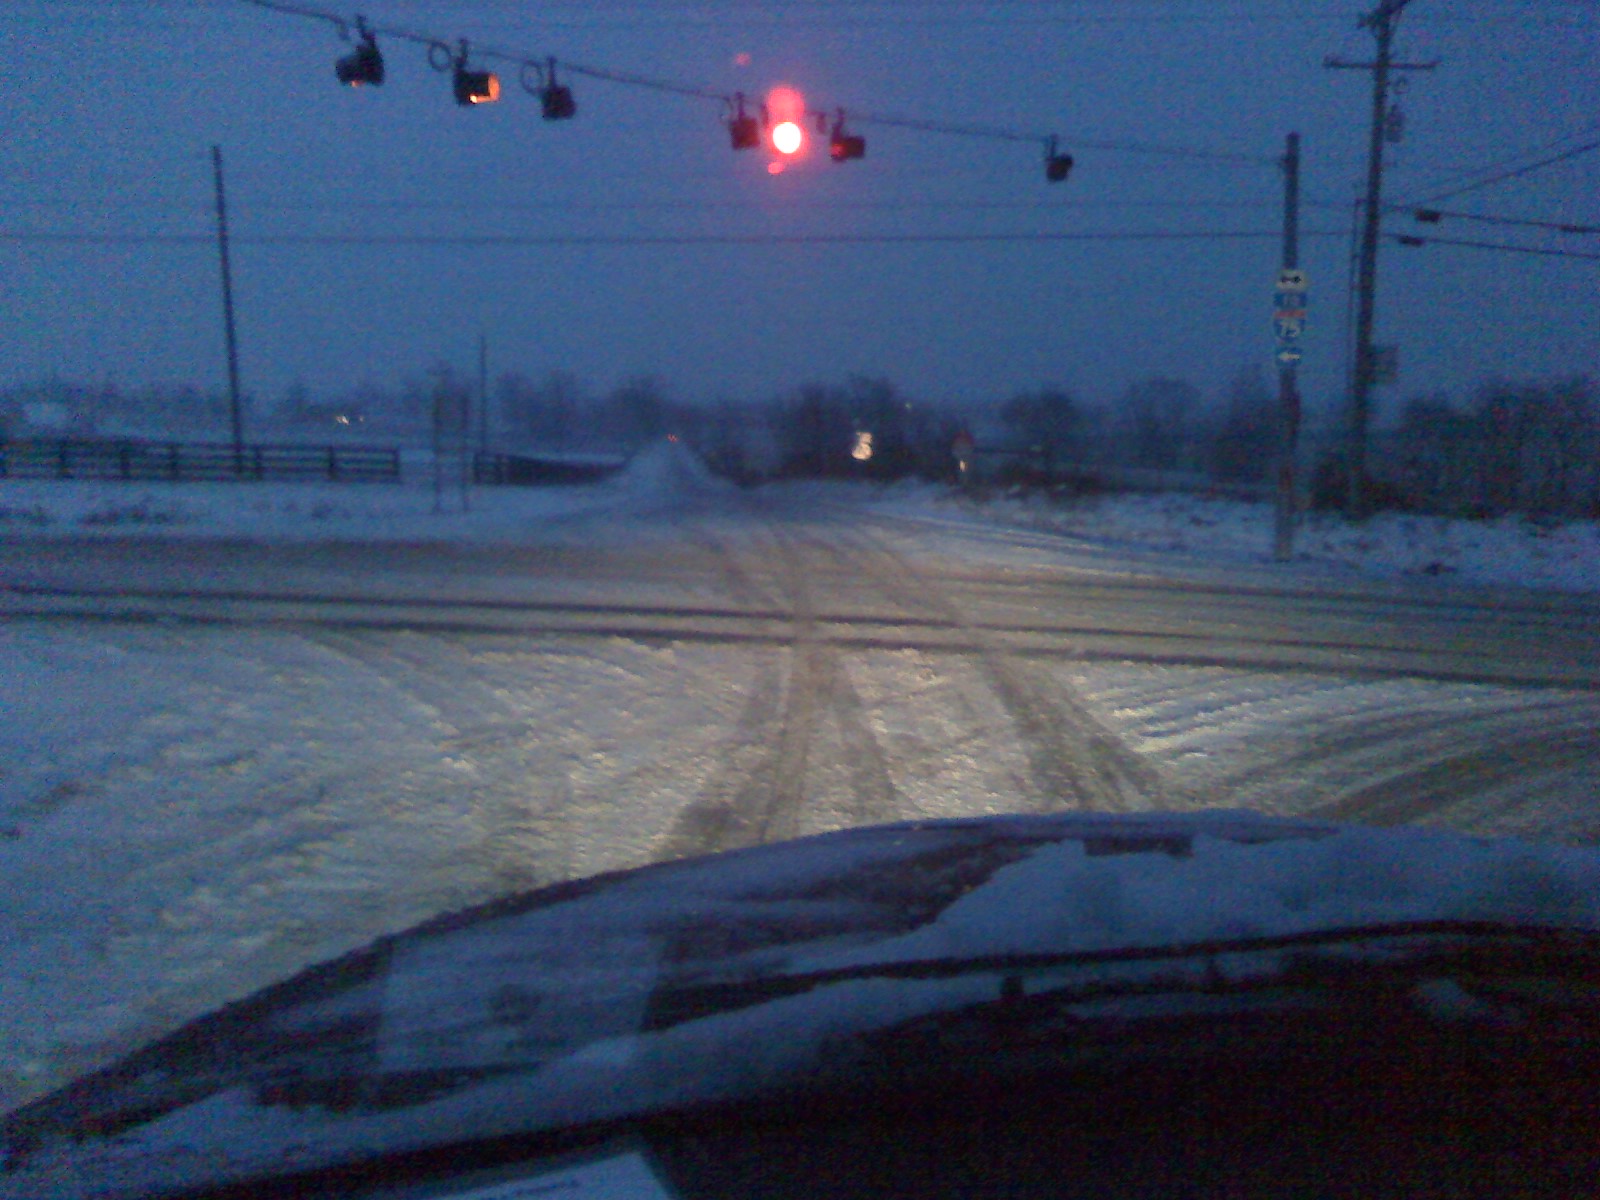 1-7-2010 5:55PM Newtown Pike and 460 Intersection